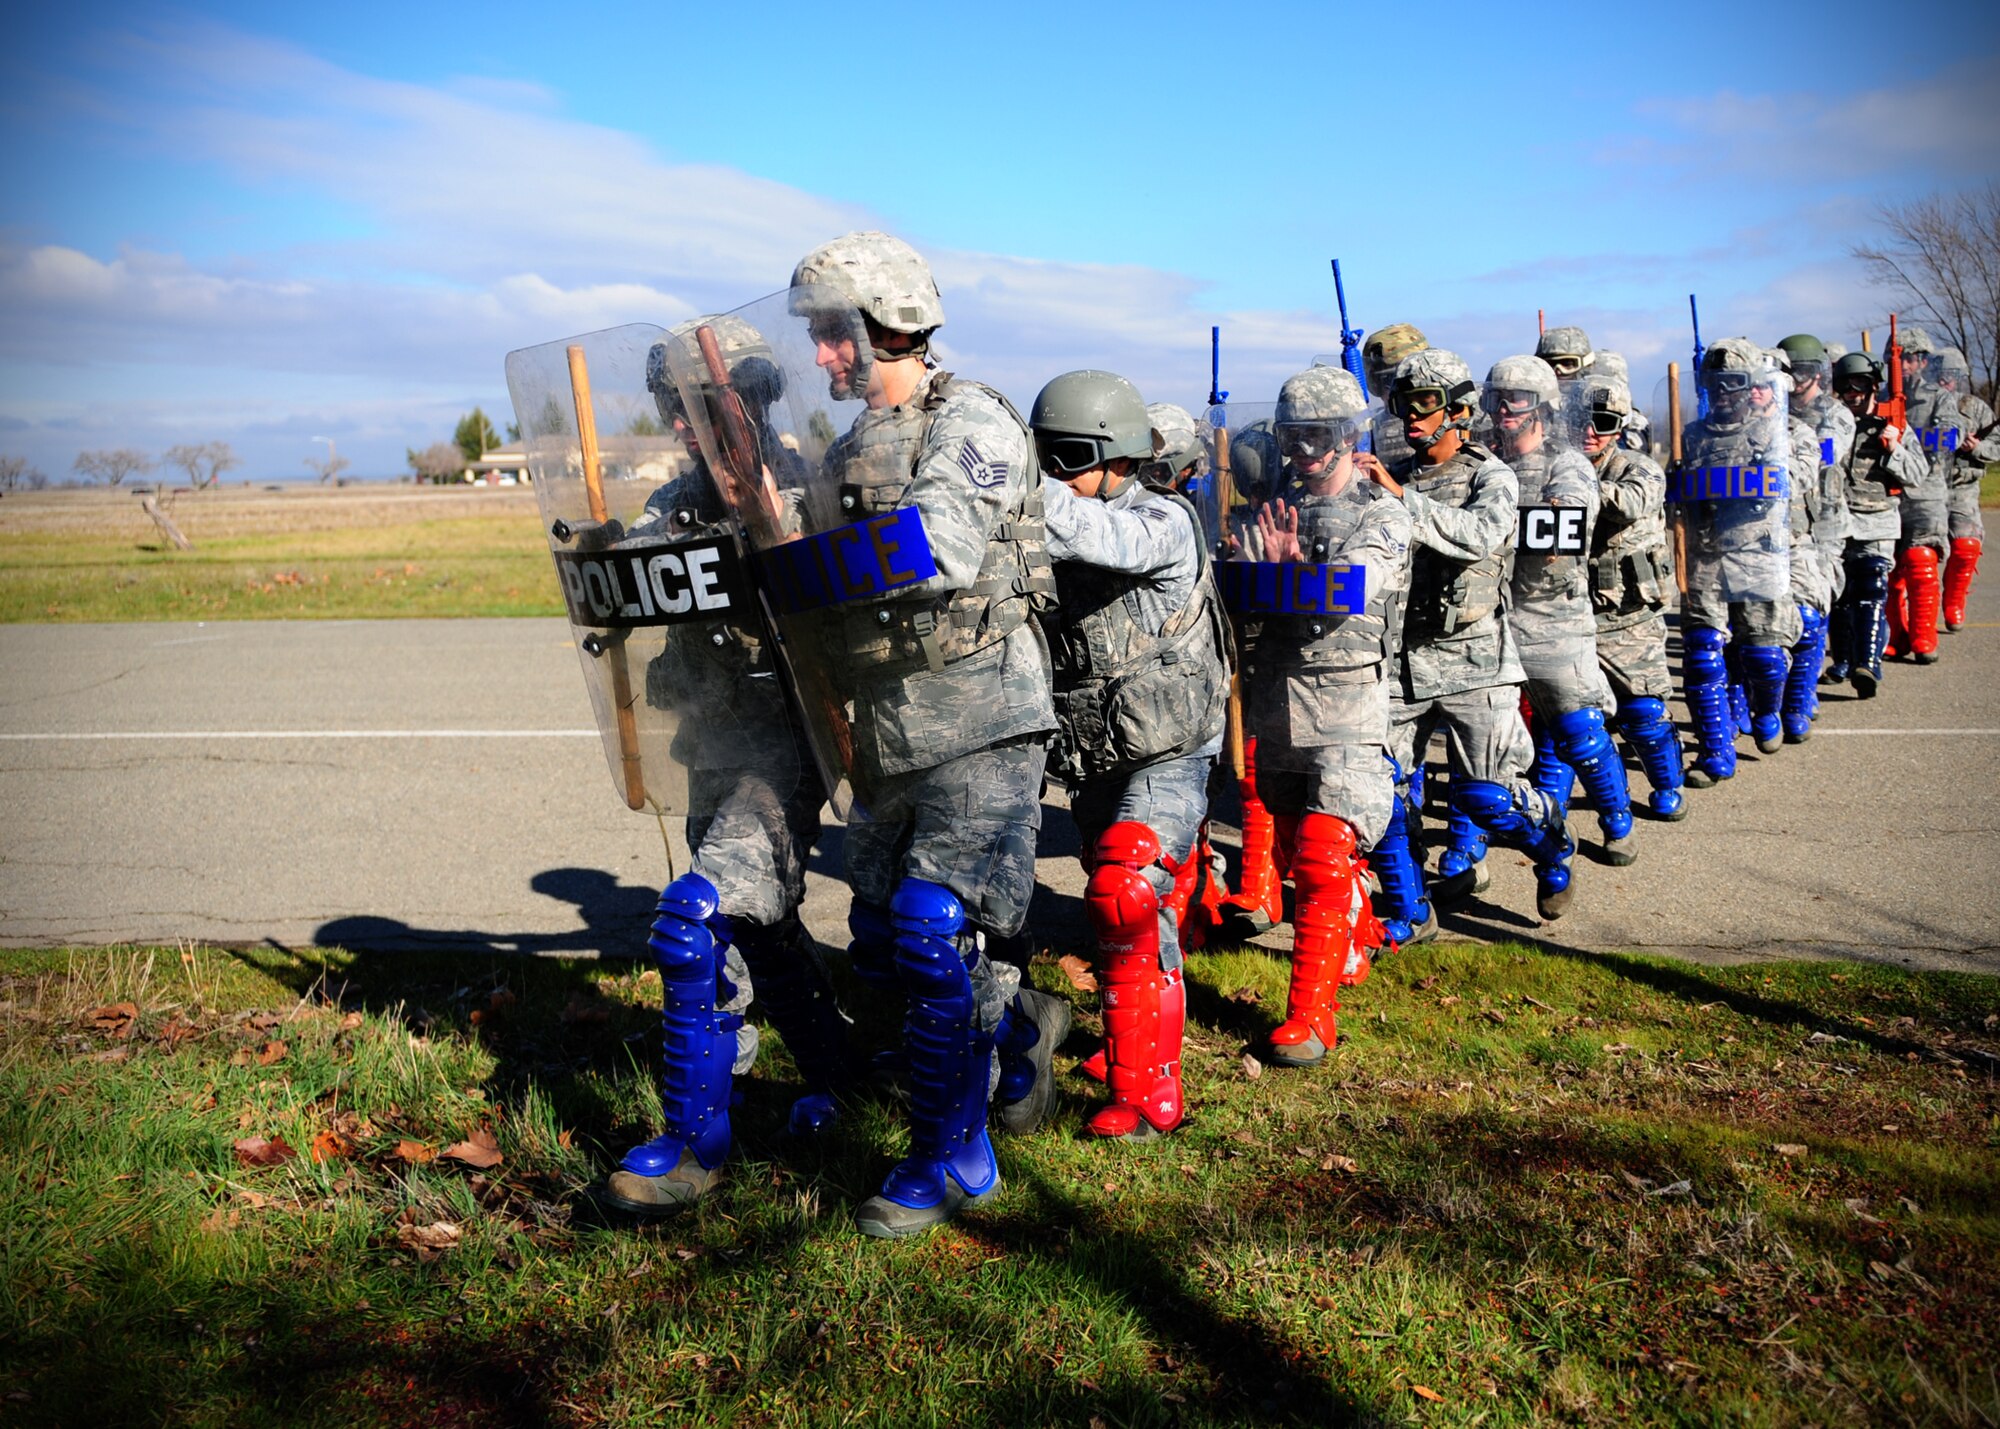 Patrolmen from the 9th Security Forces Squadron march to a simulated disturbance during training at Beale Air Force Base, Calif., Jan. 25, 2013. 9th SFS officers train to be experts in civil disturbance response. (U.S. Air Force photo by Senior Airman Shawn Nickel/Released)